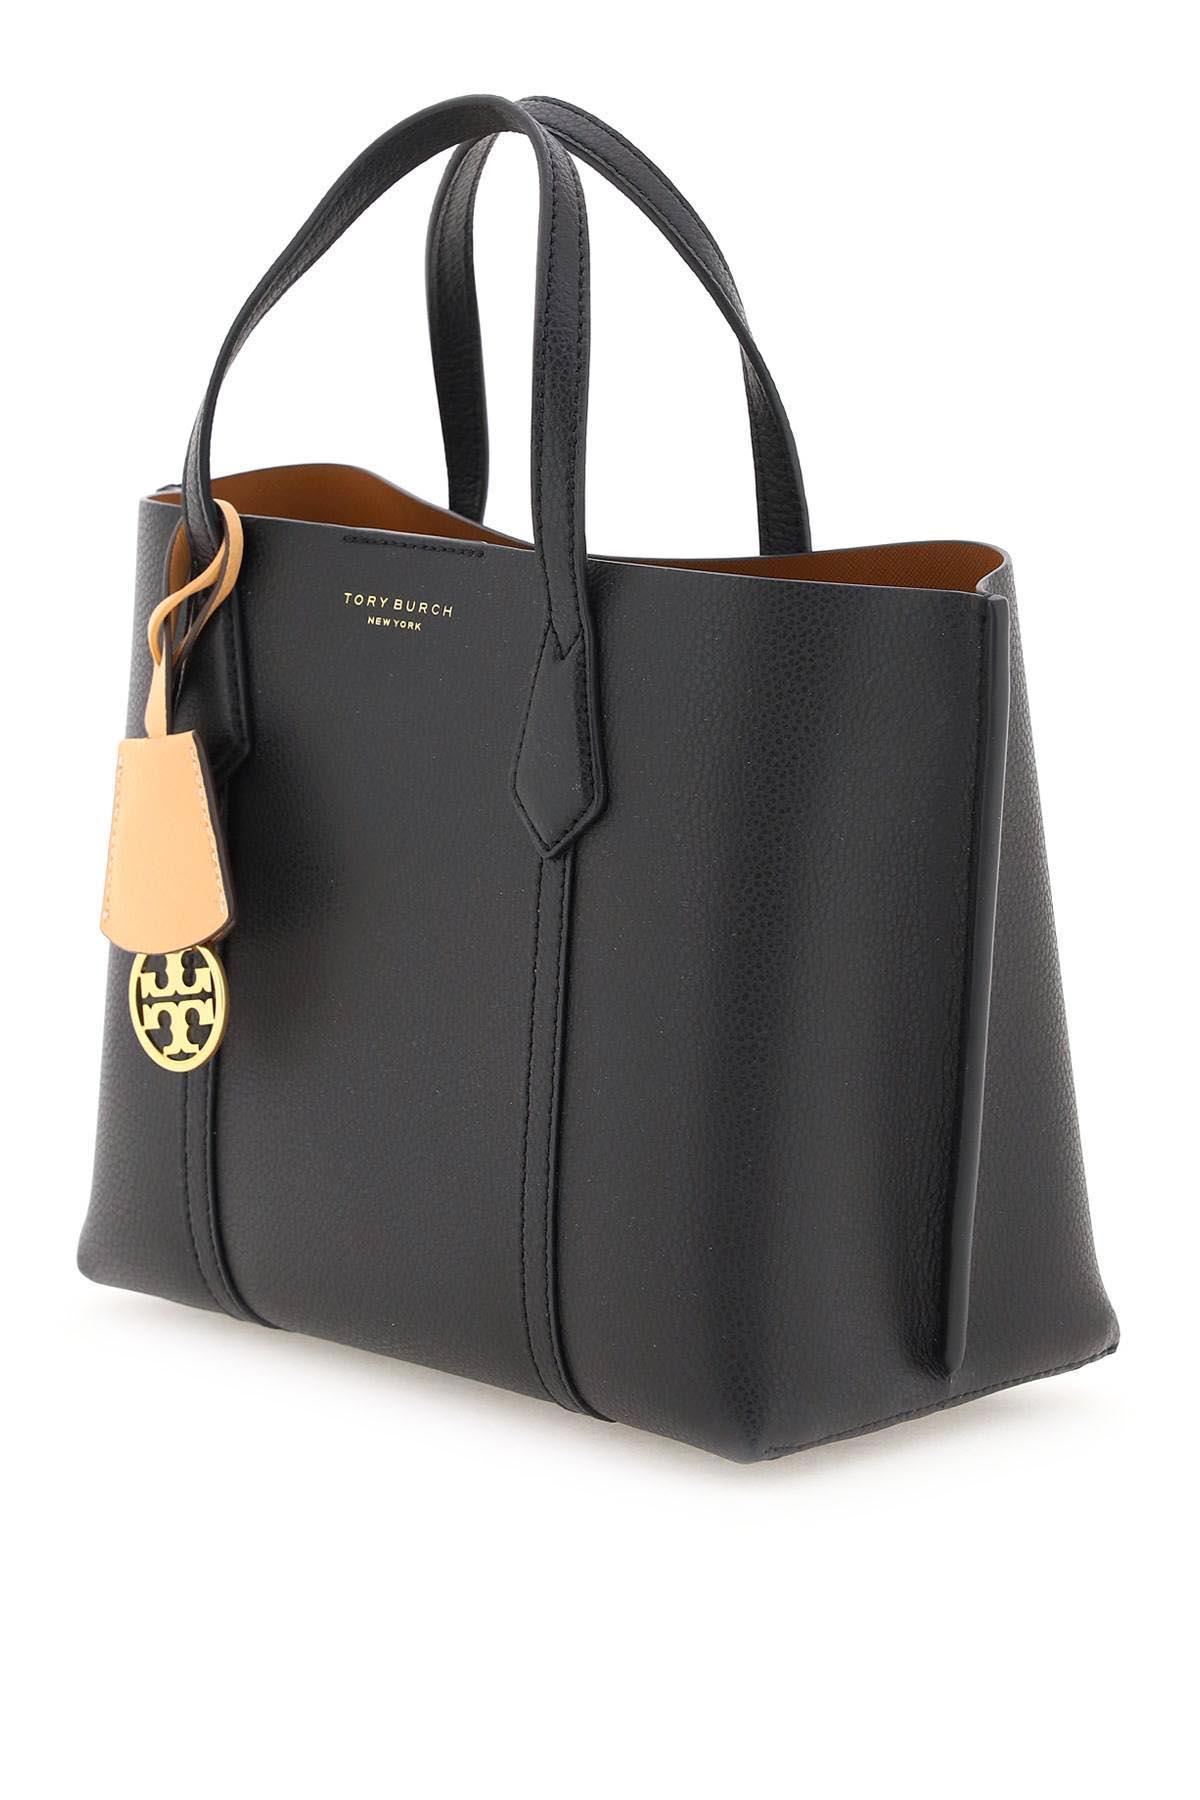 Tory Burch Small Perry Shopping Bag in Black | Lyst